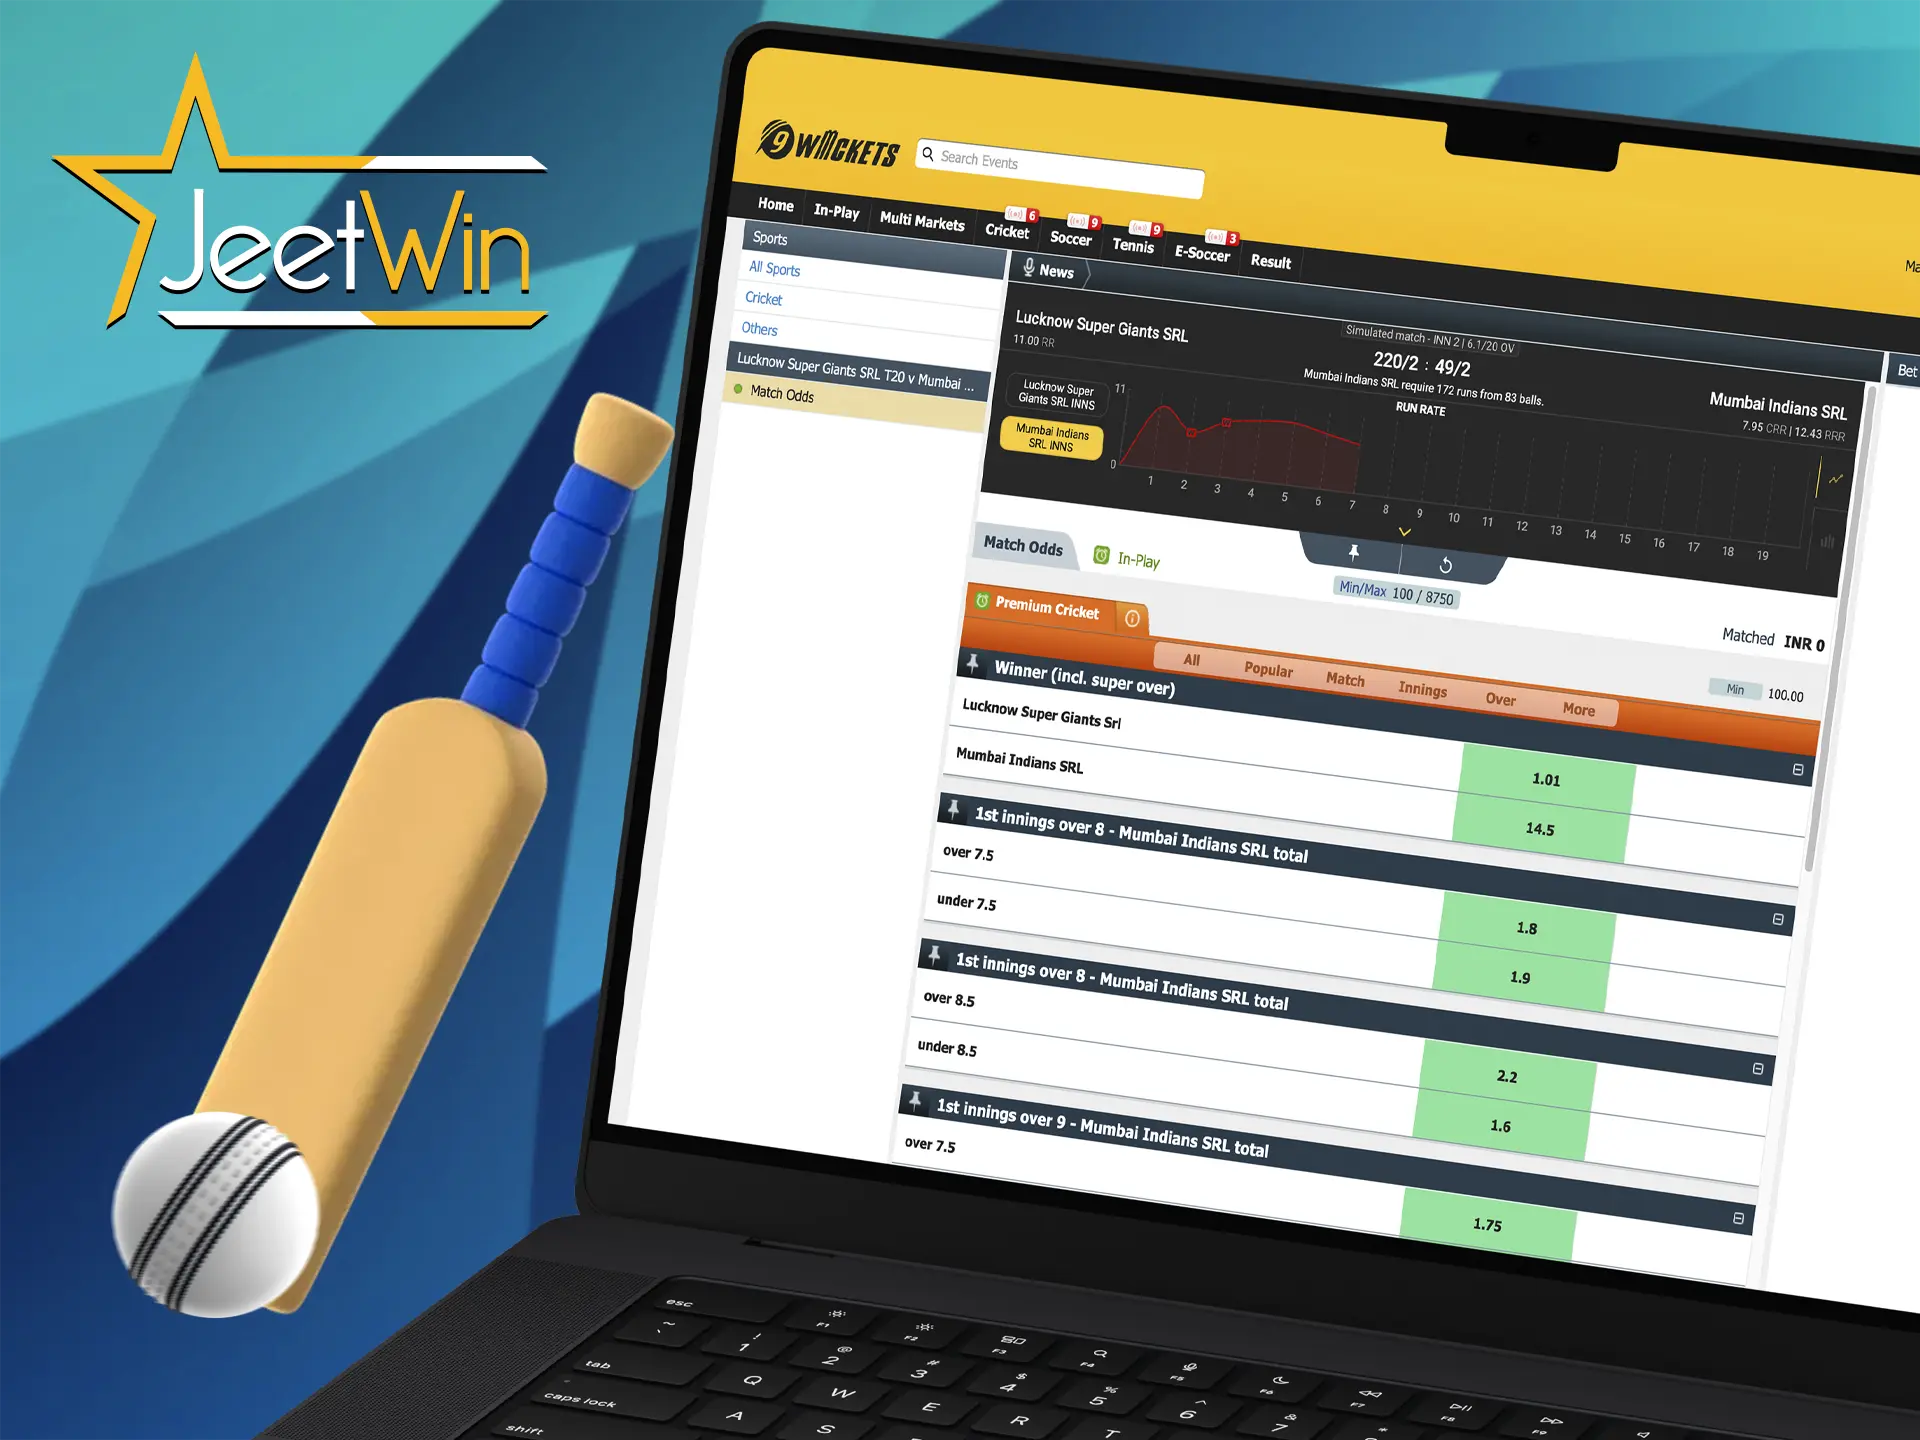 Bookmaker Jeetwin is appreciated by a large number of users for the best odds and variety of sporting events.